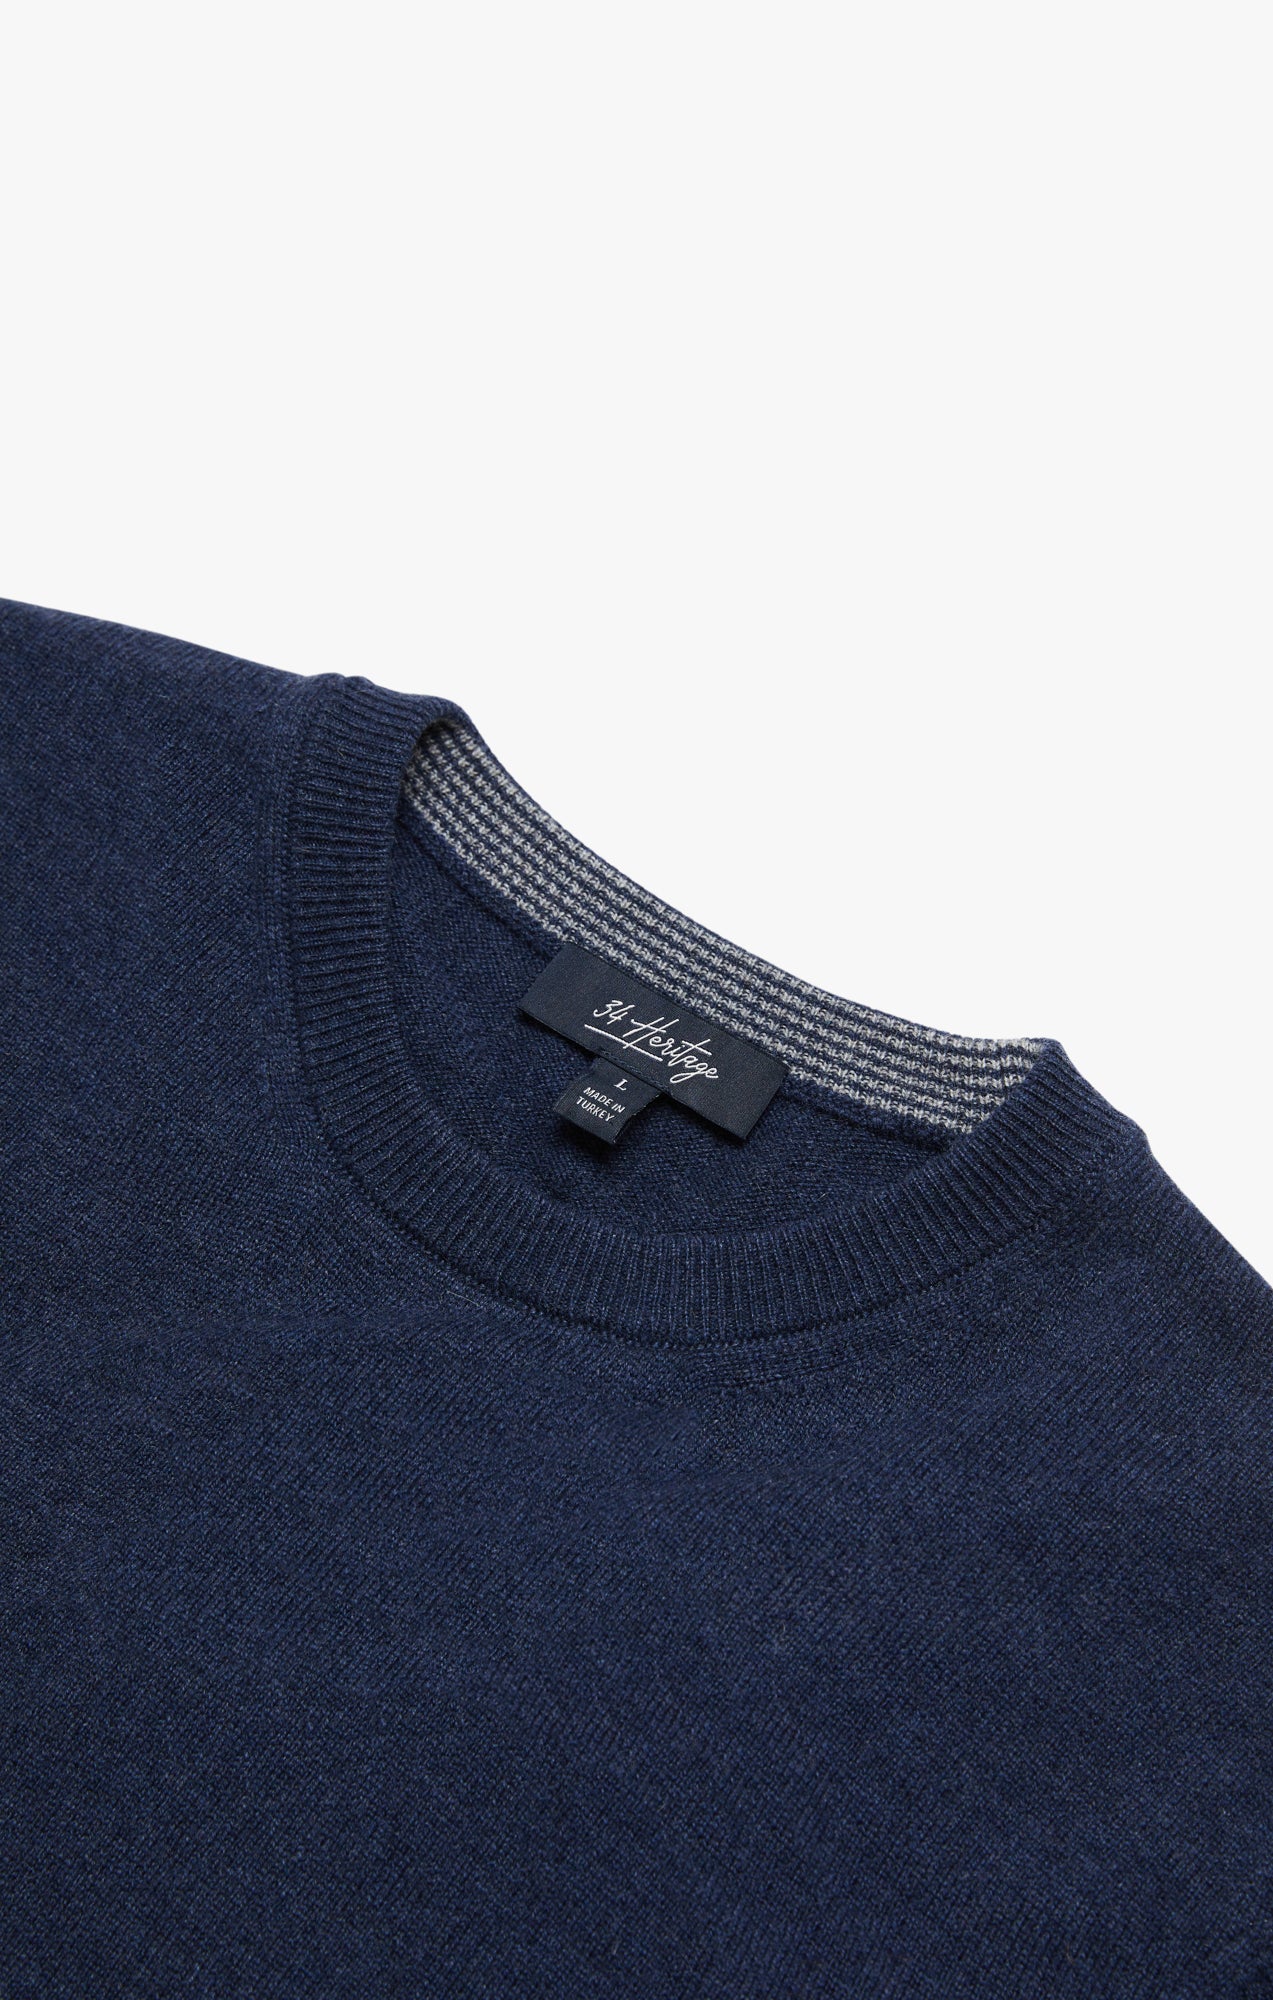 Cashmere Crew Neck Sweater In Navy Image 10